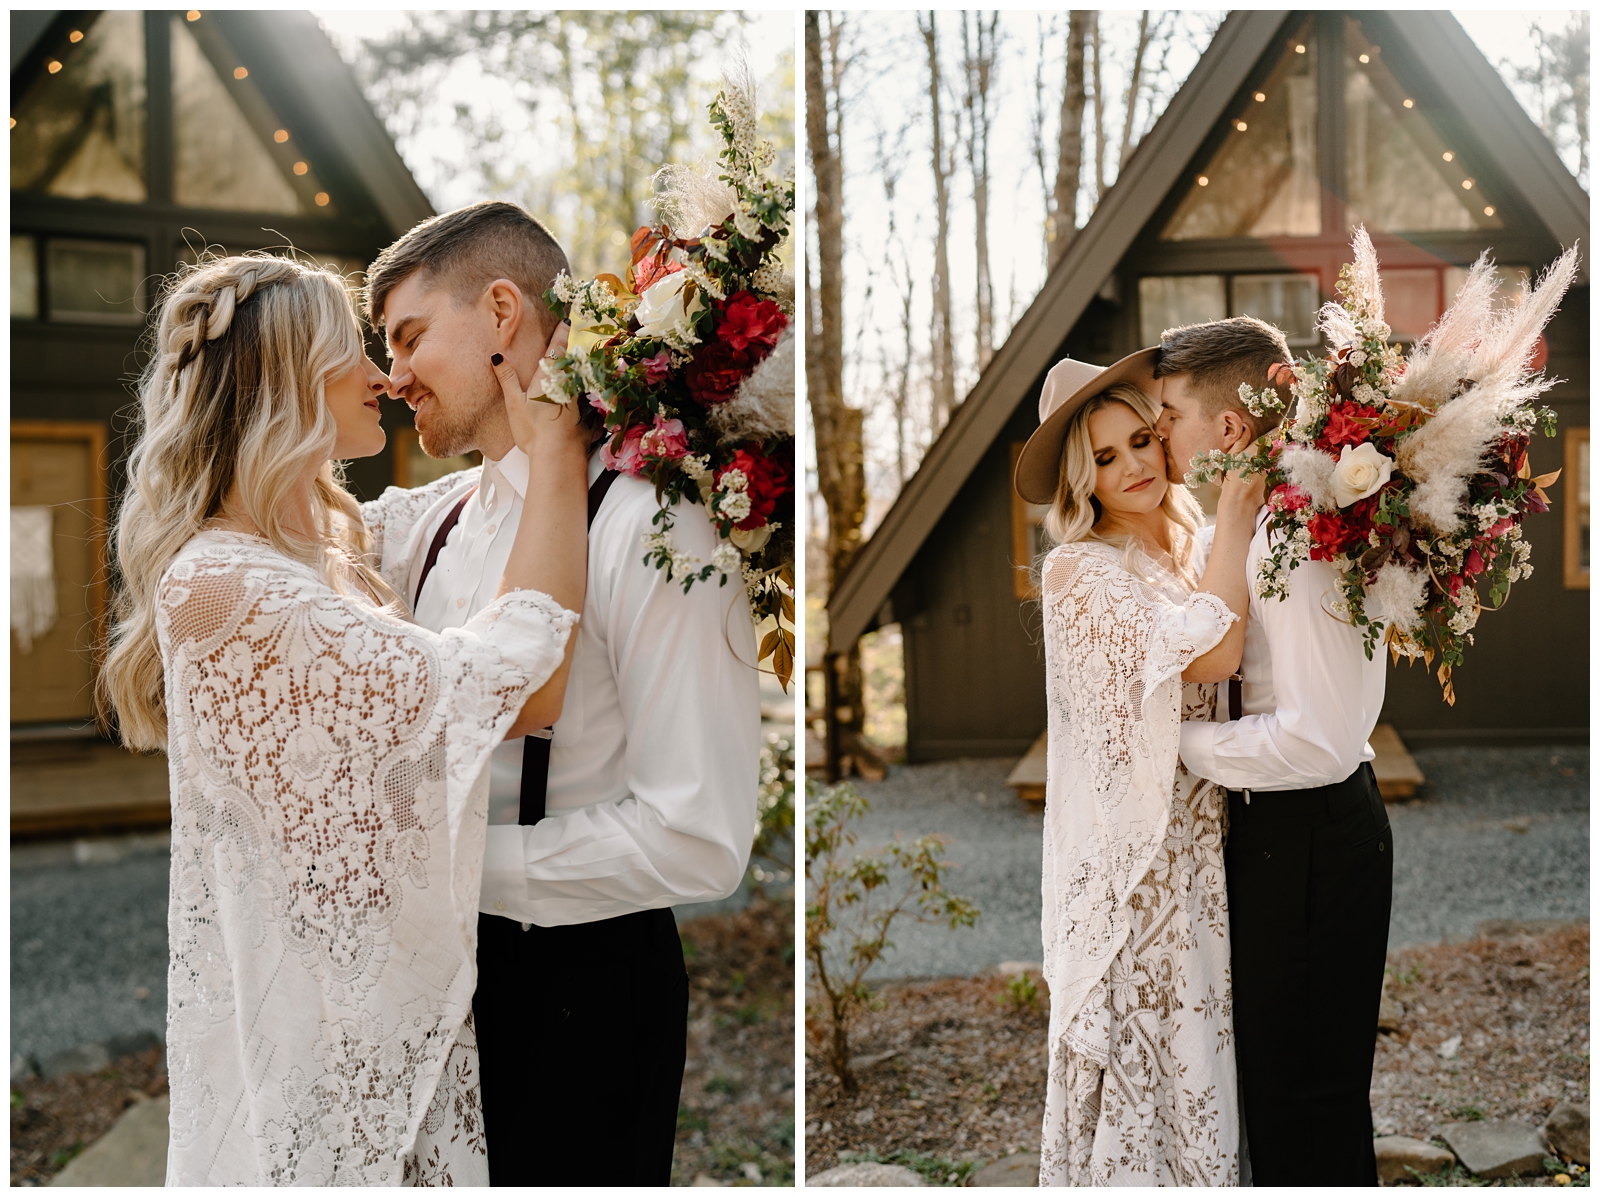 Cozy cabin vibes for your boho elopement in the mountains